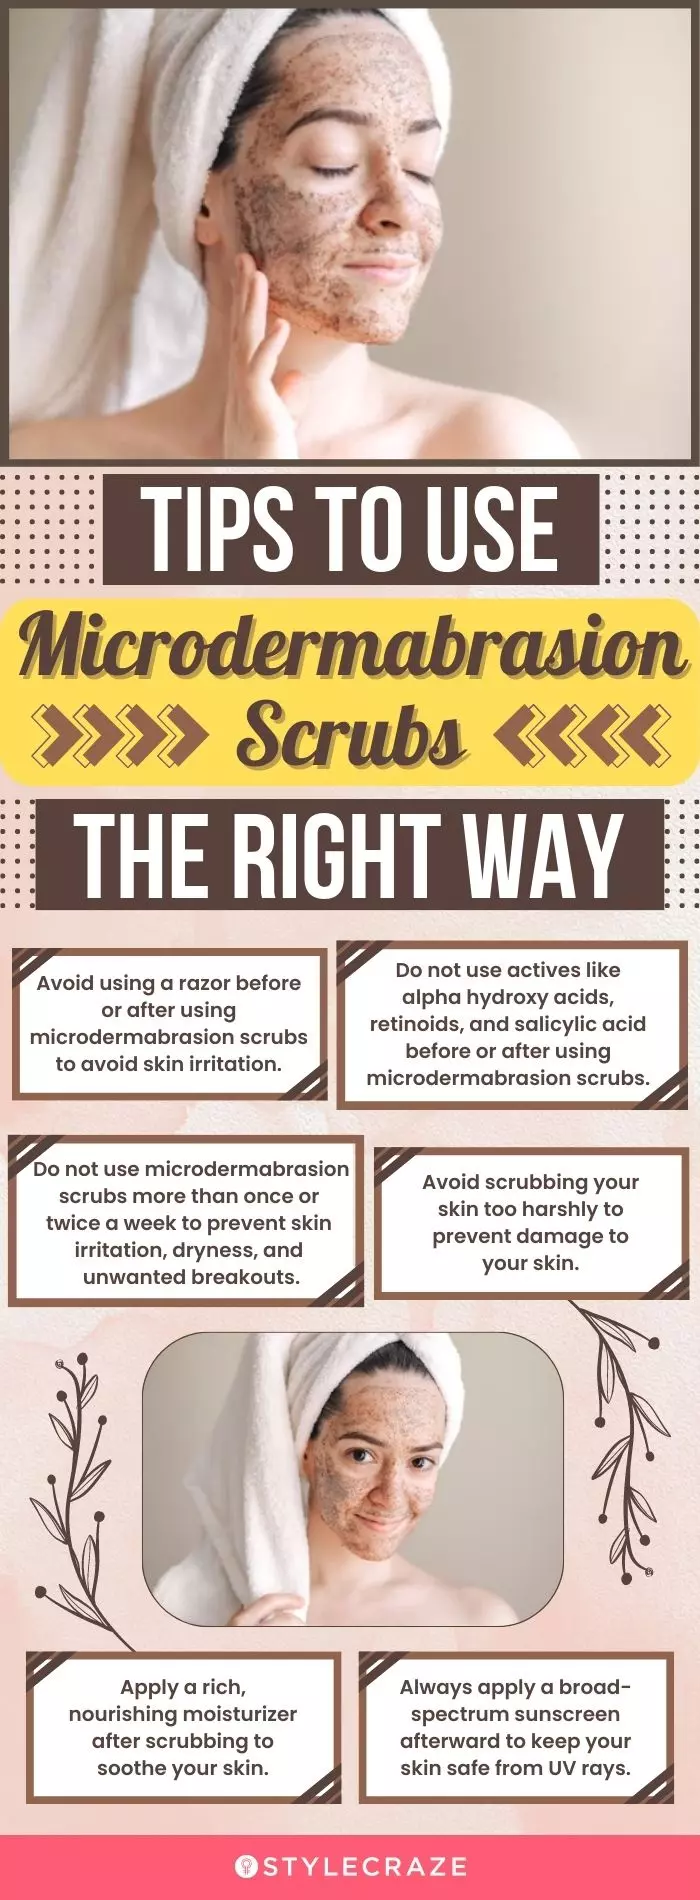 Tips To Use Microdermabrasion Scrubs The Right Way (infographic)